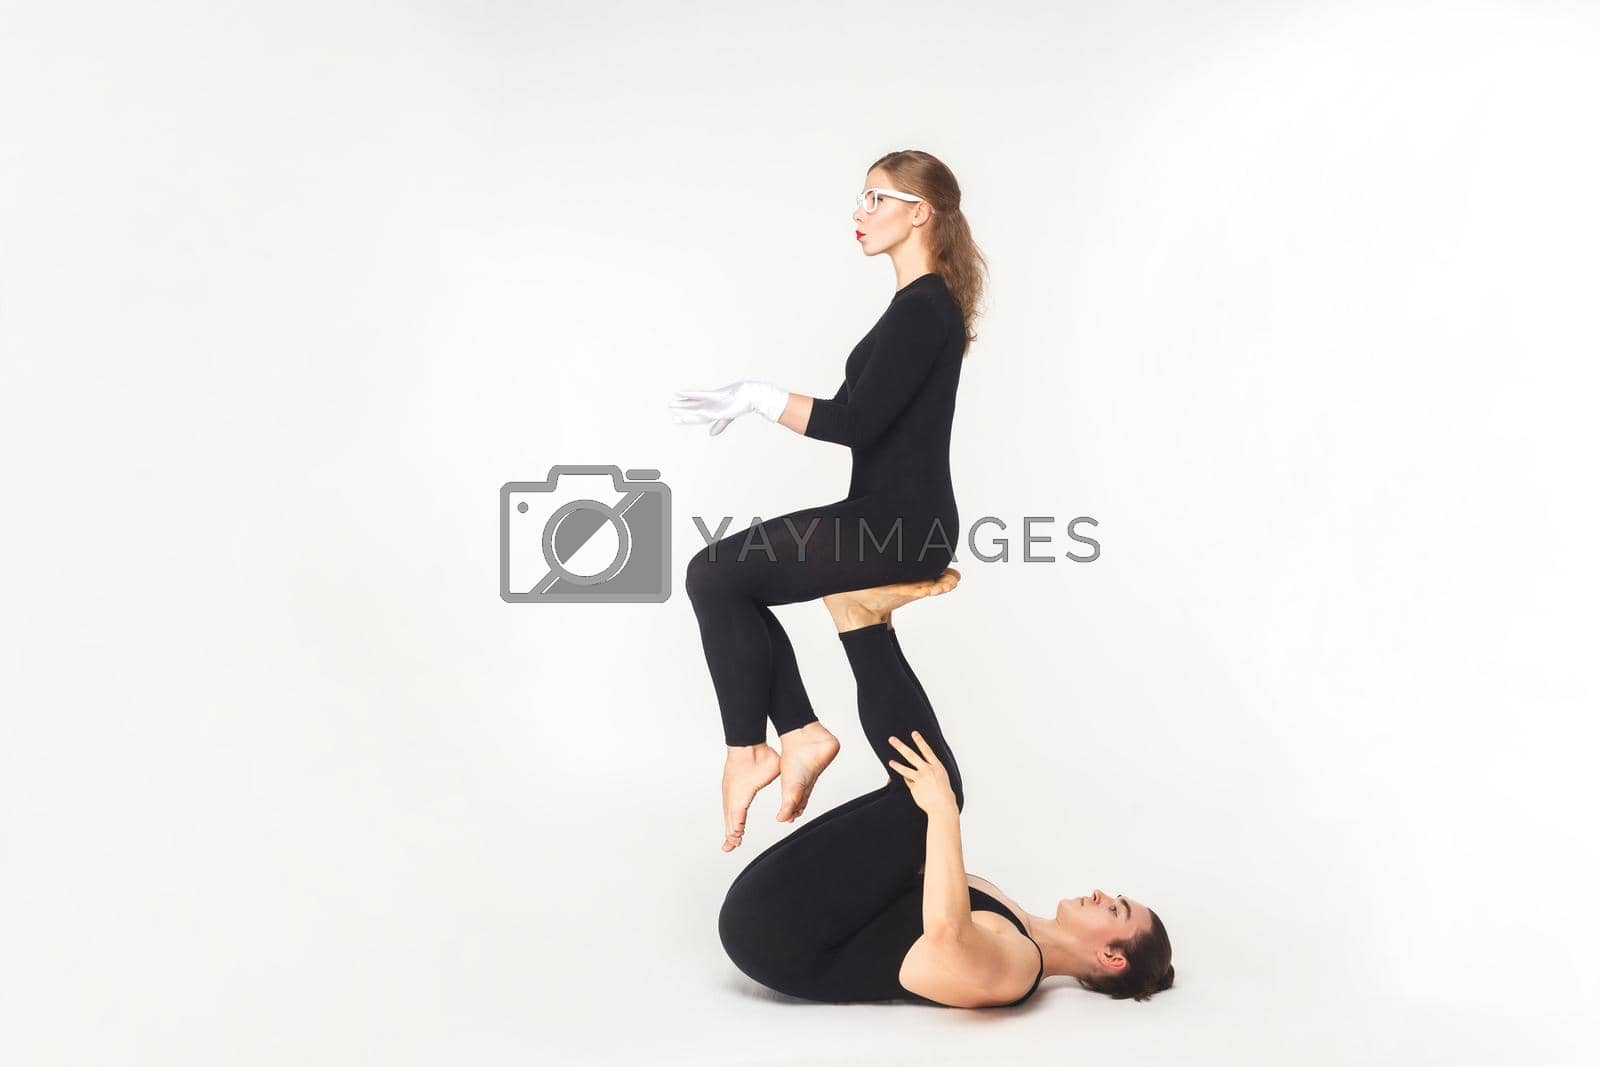 Royalty free image of Acrobatic concept, sit pose. Young man holding woman legs, balancing. by Khosro1